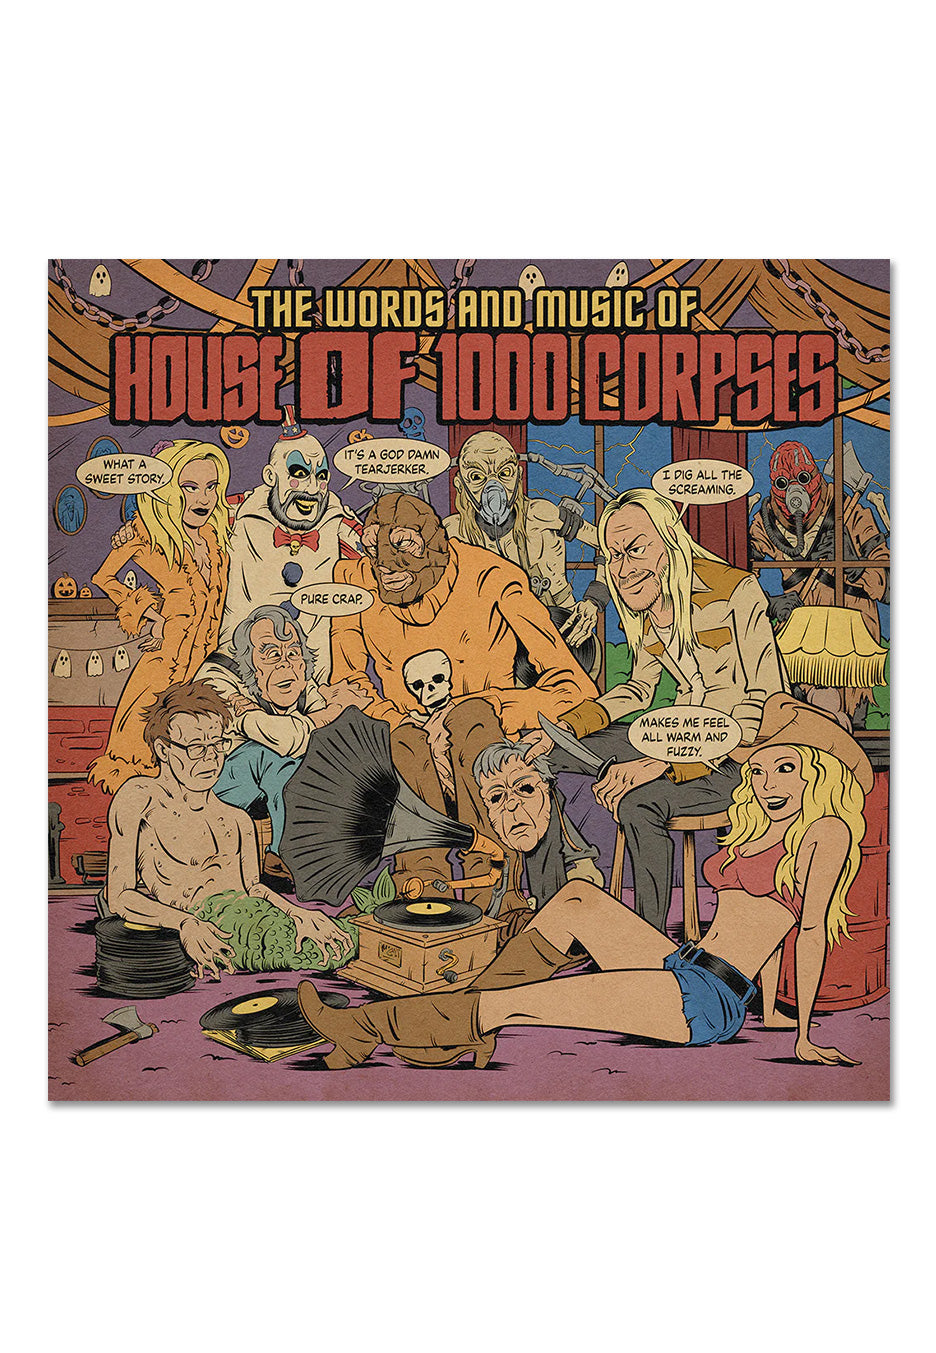 Rob Zombie - The Words & Music Of House Of 1000 Corpses Ltd. Orange/Purple/Green - Colored 2 Vinyl